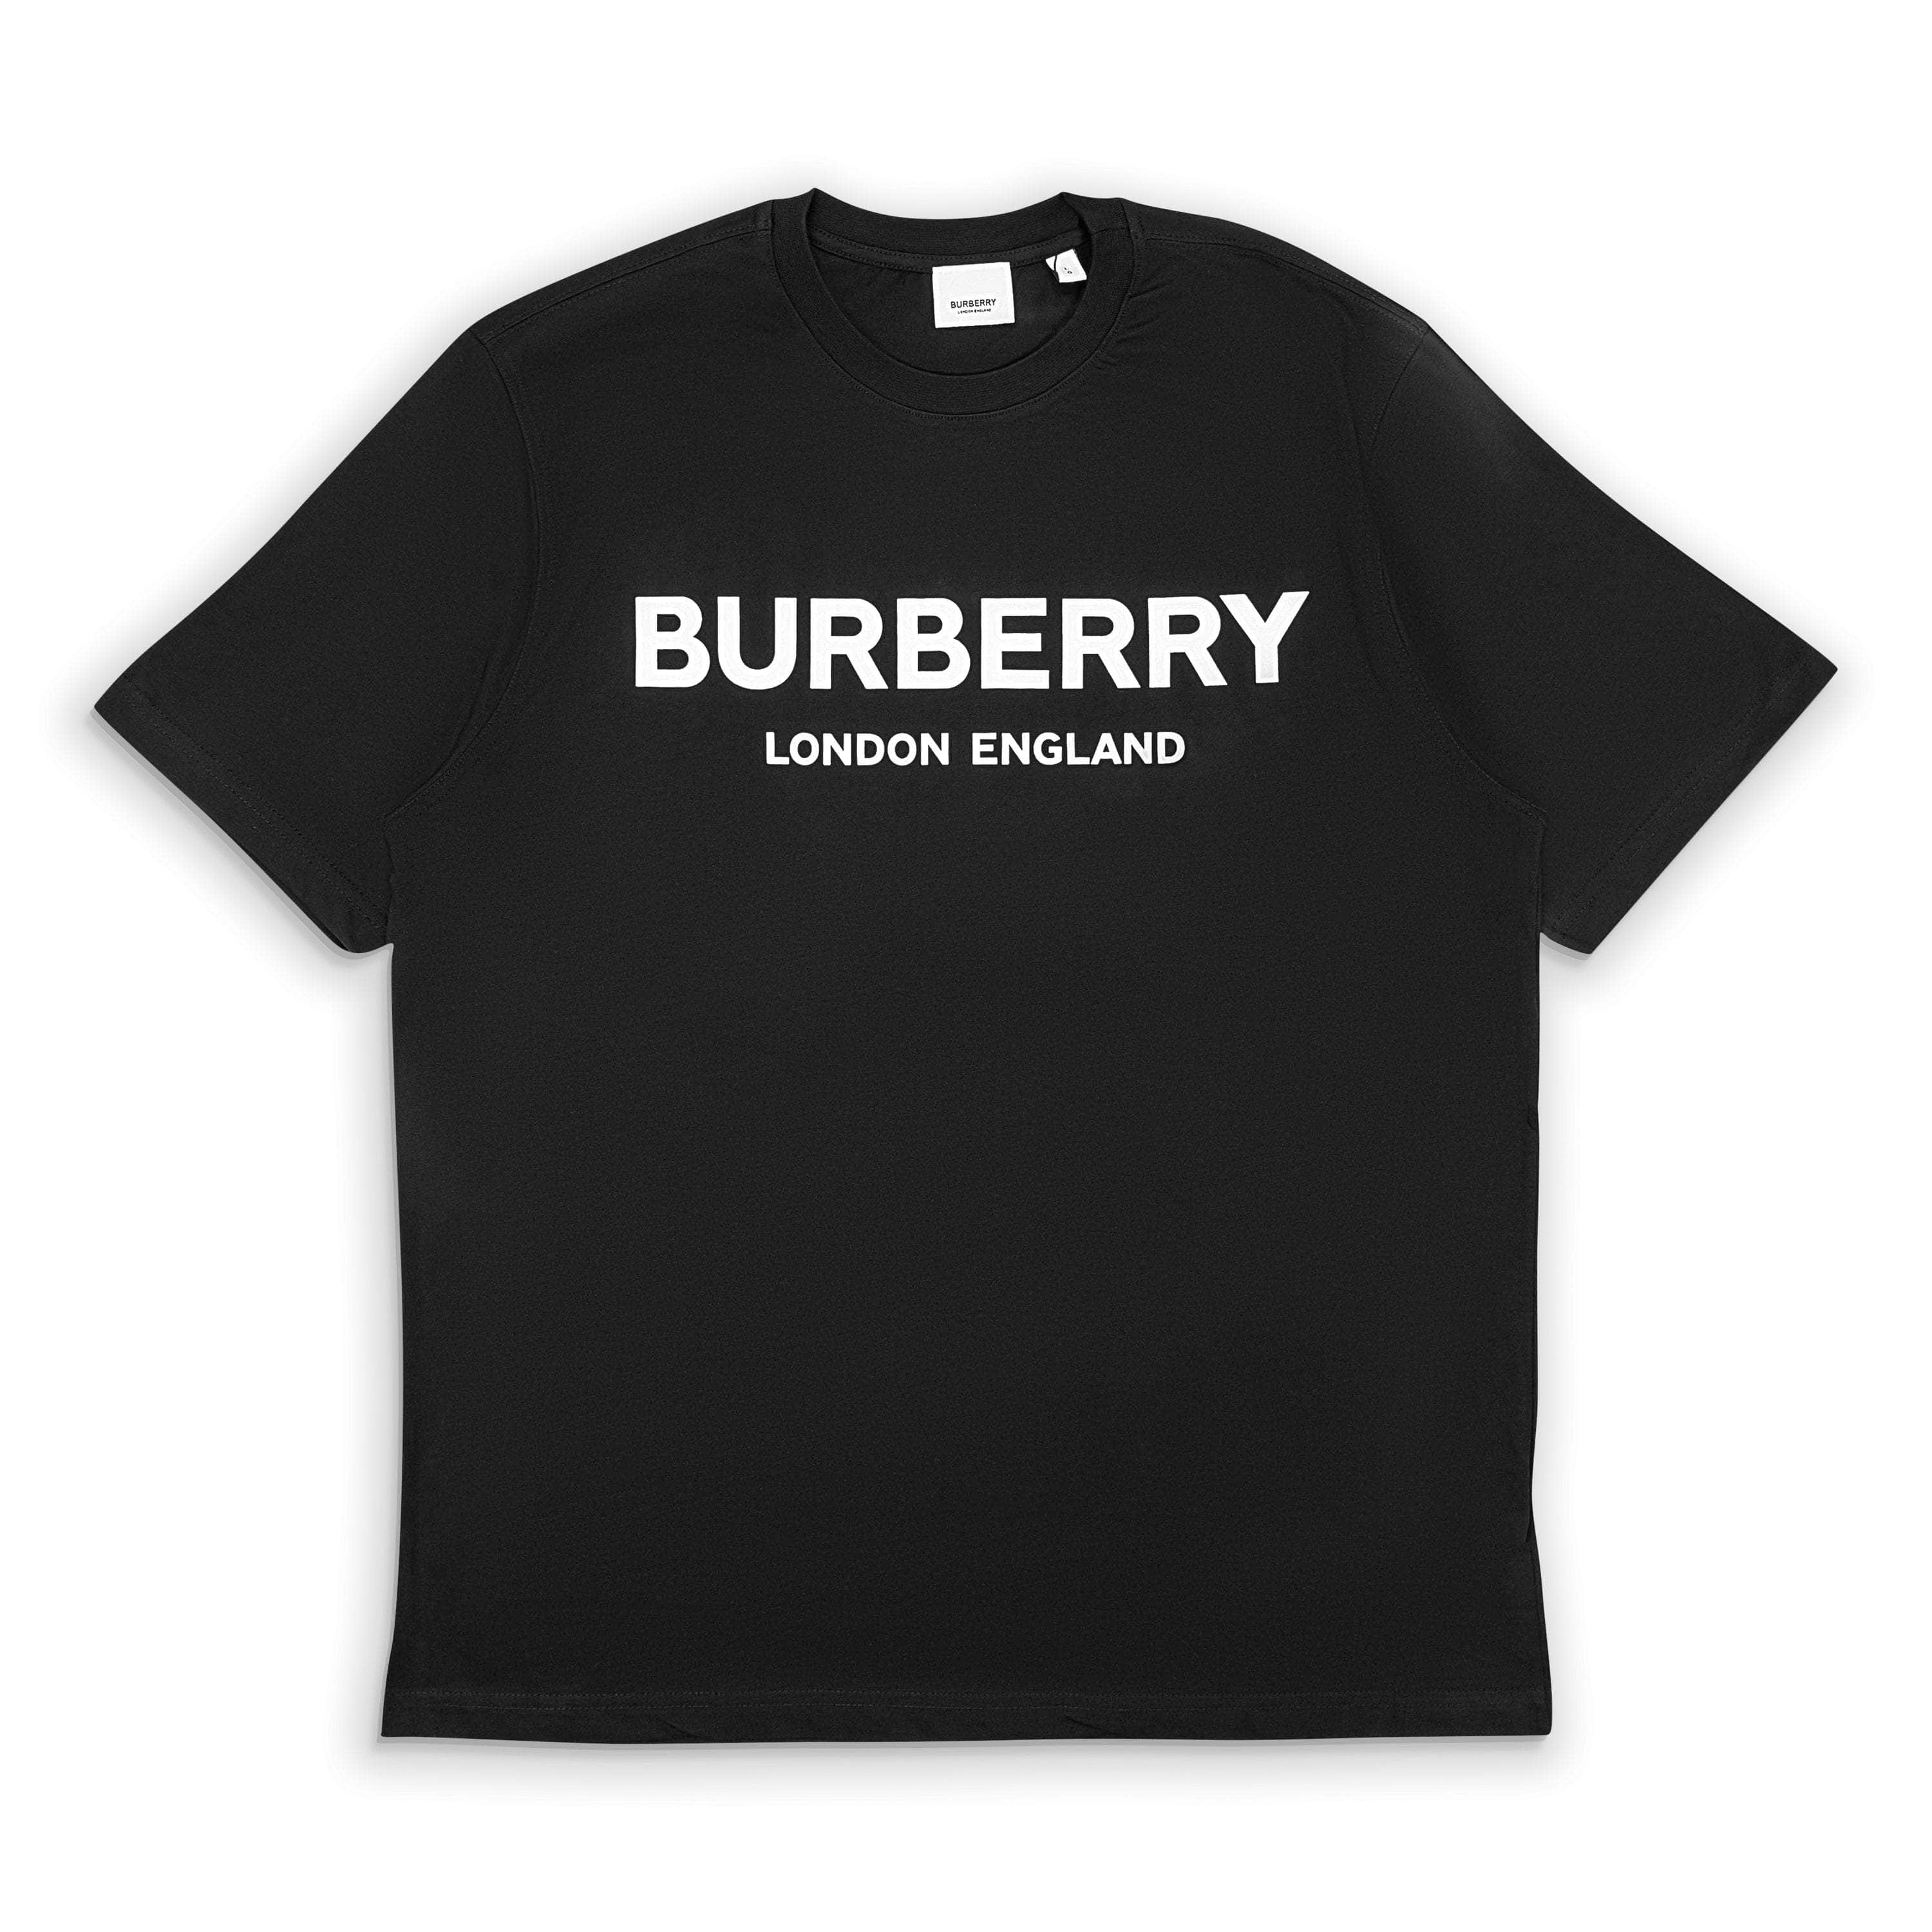 Burberry 250-500, burberry, channelenable-all, chicmi, couponcollection, main-clothing, shop375, Stadium Goods Black White Logo T-Shirt